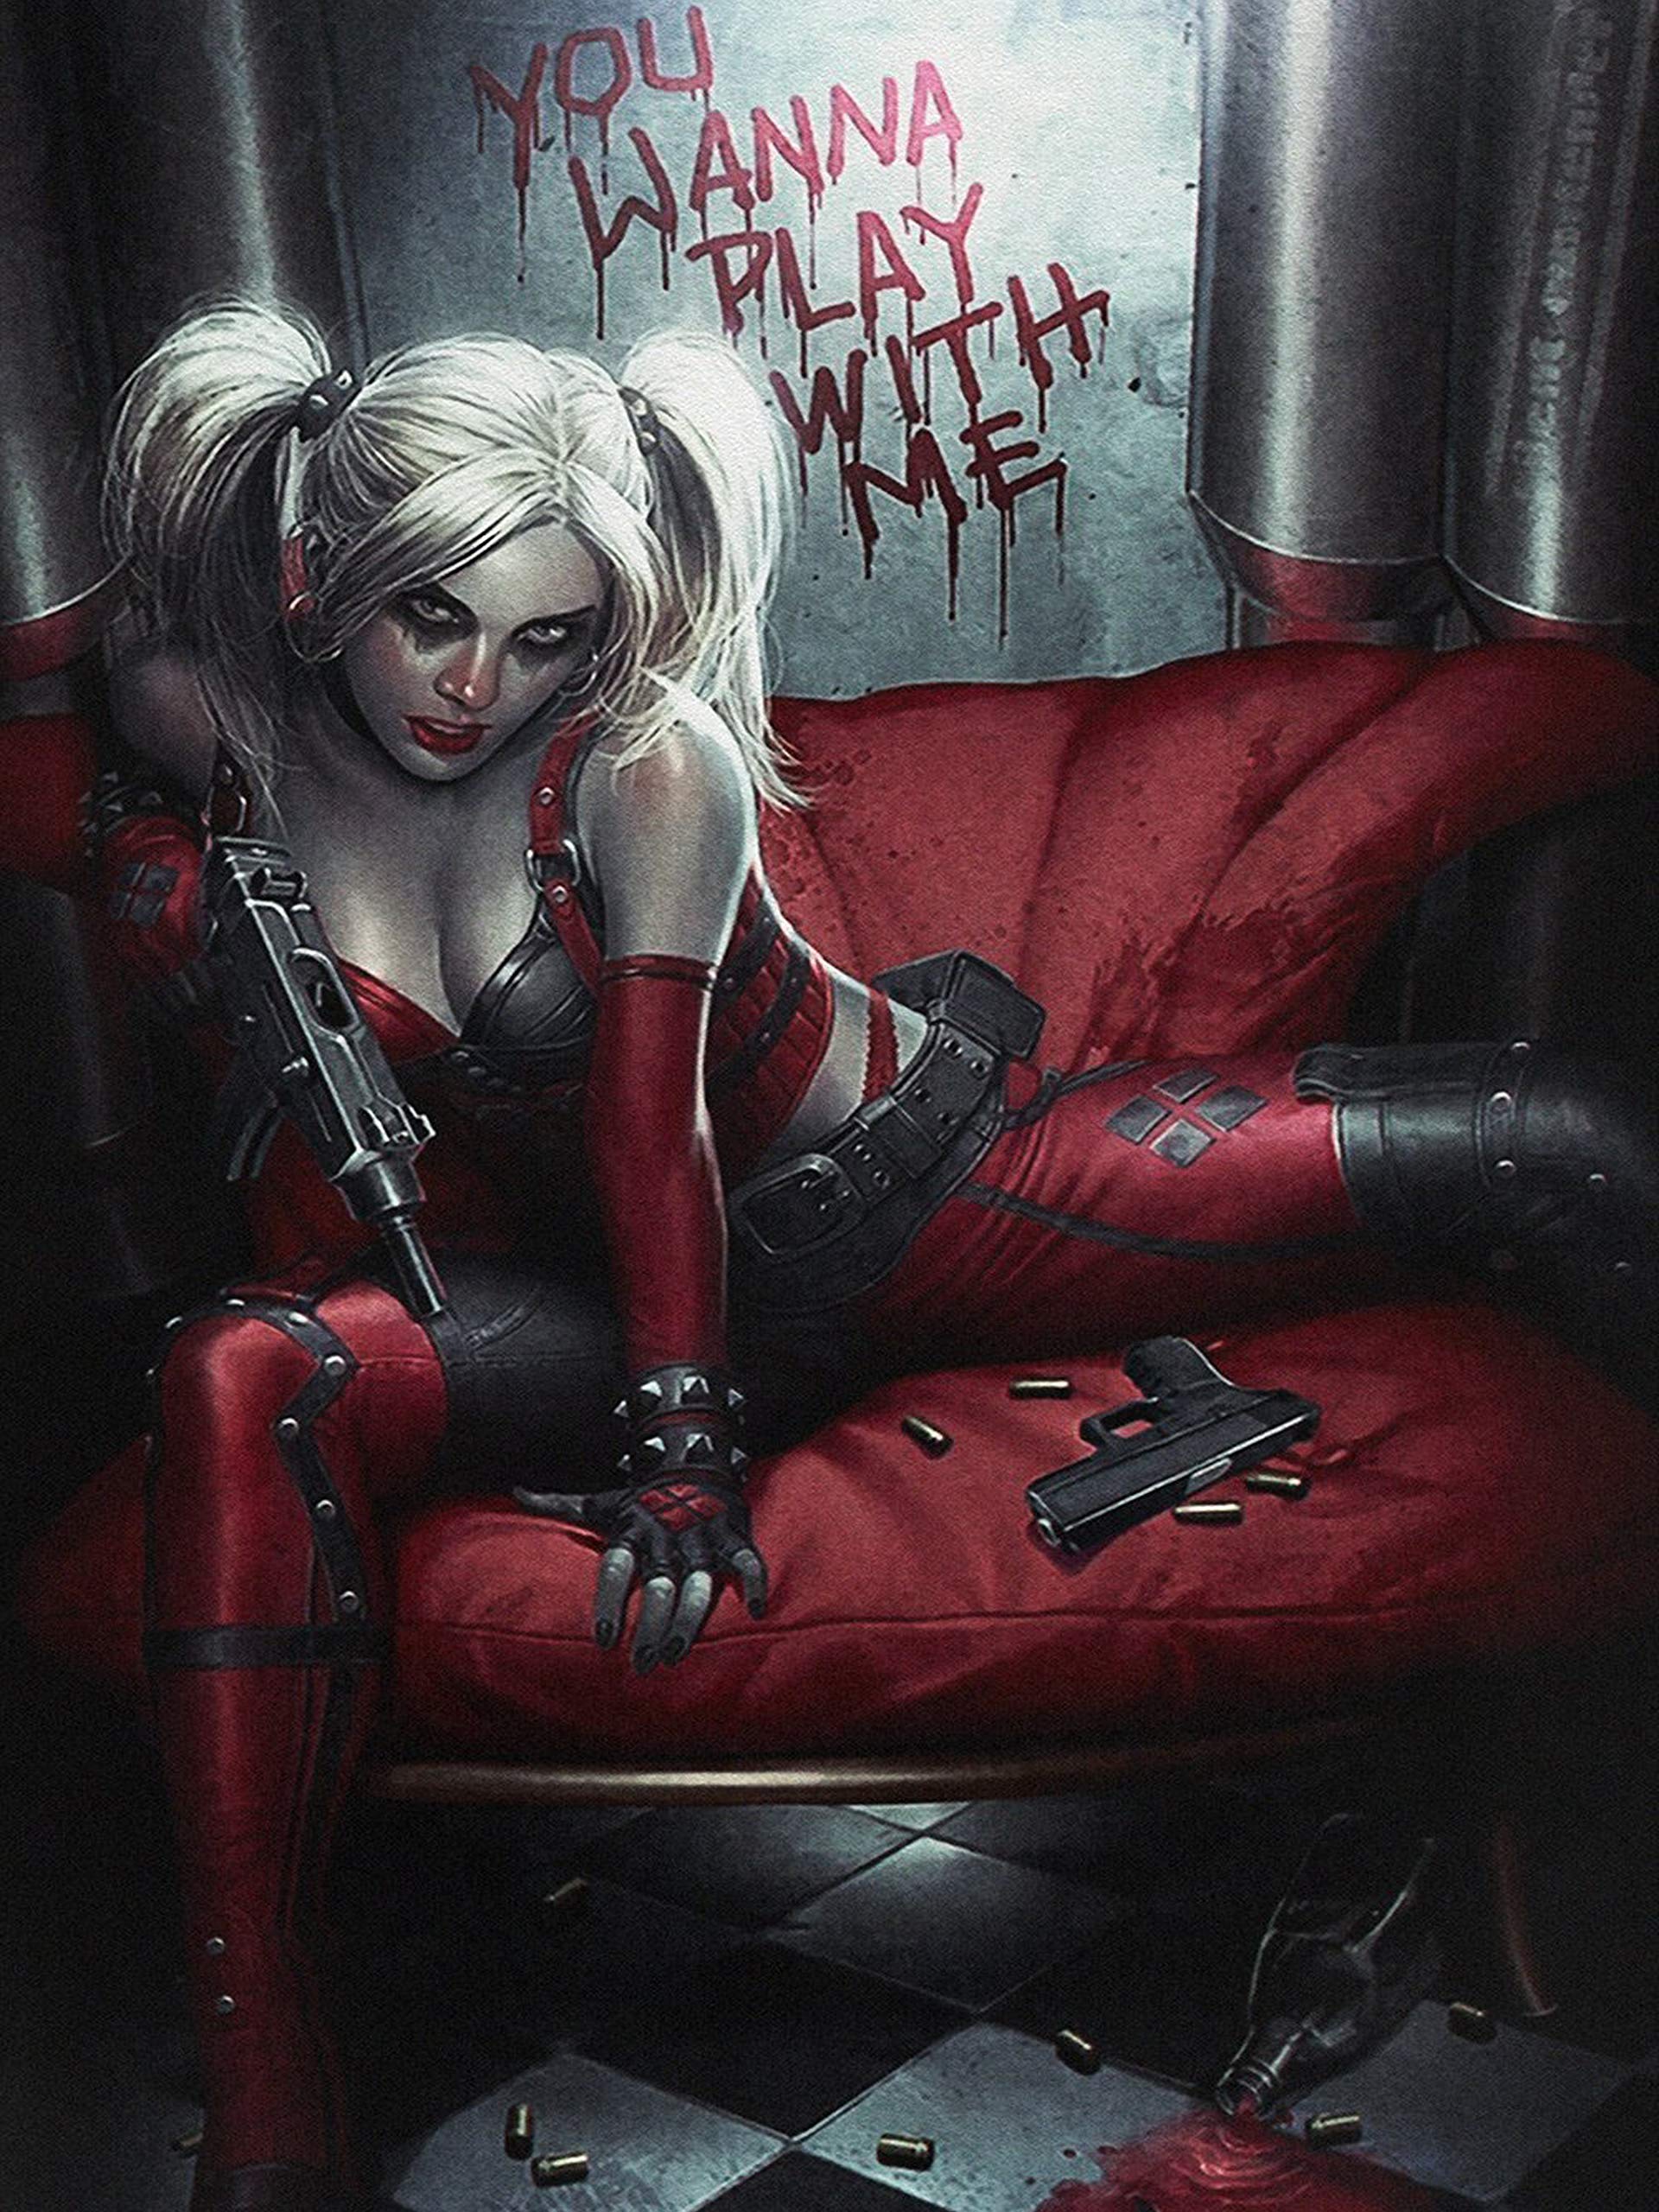 bevin allen share hot pictures of harley quinn photos